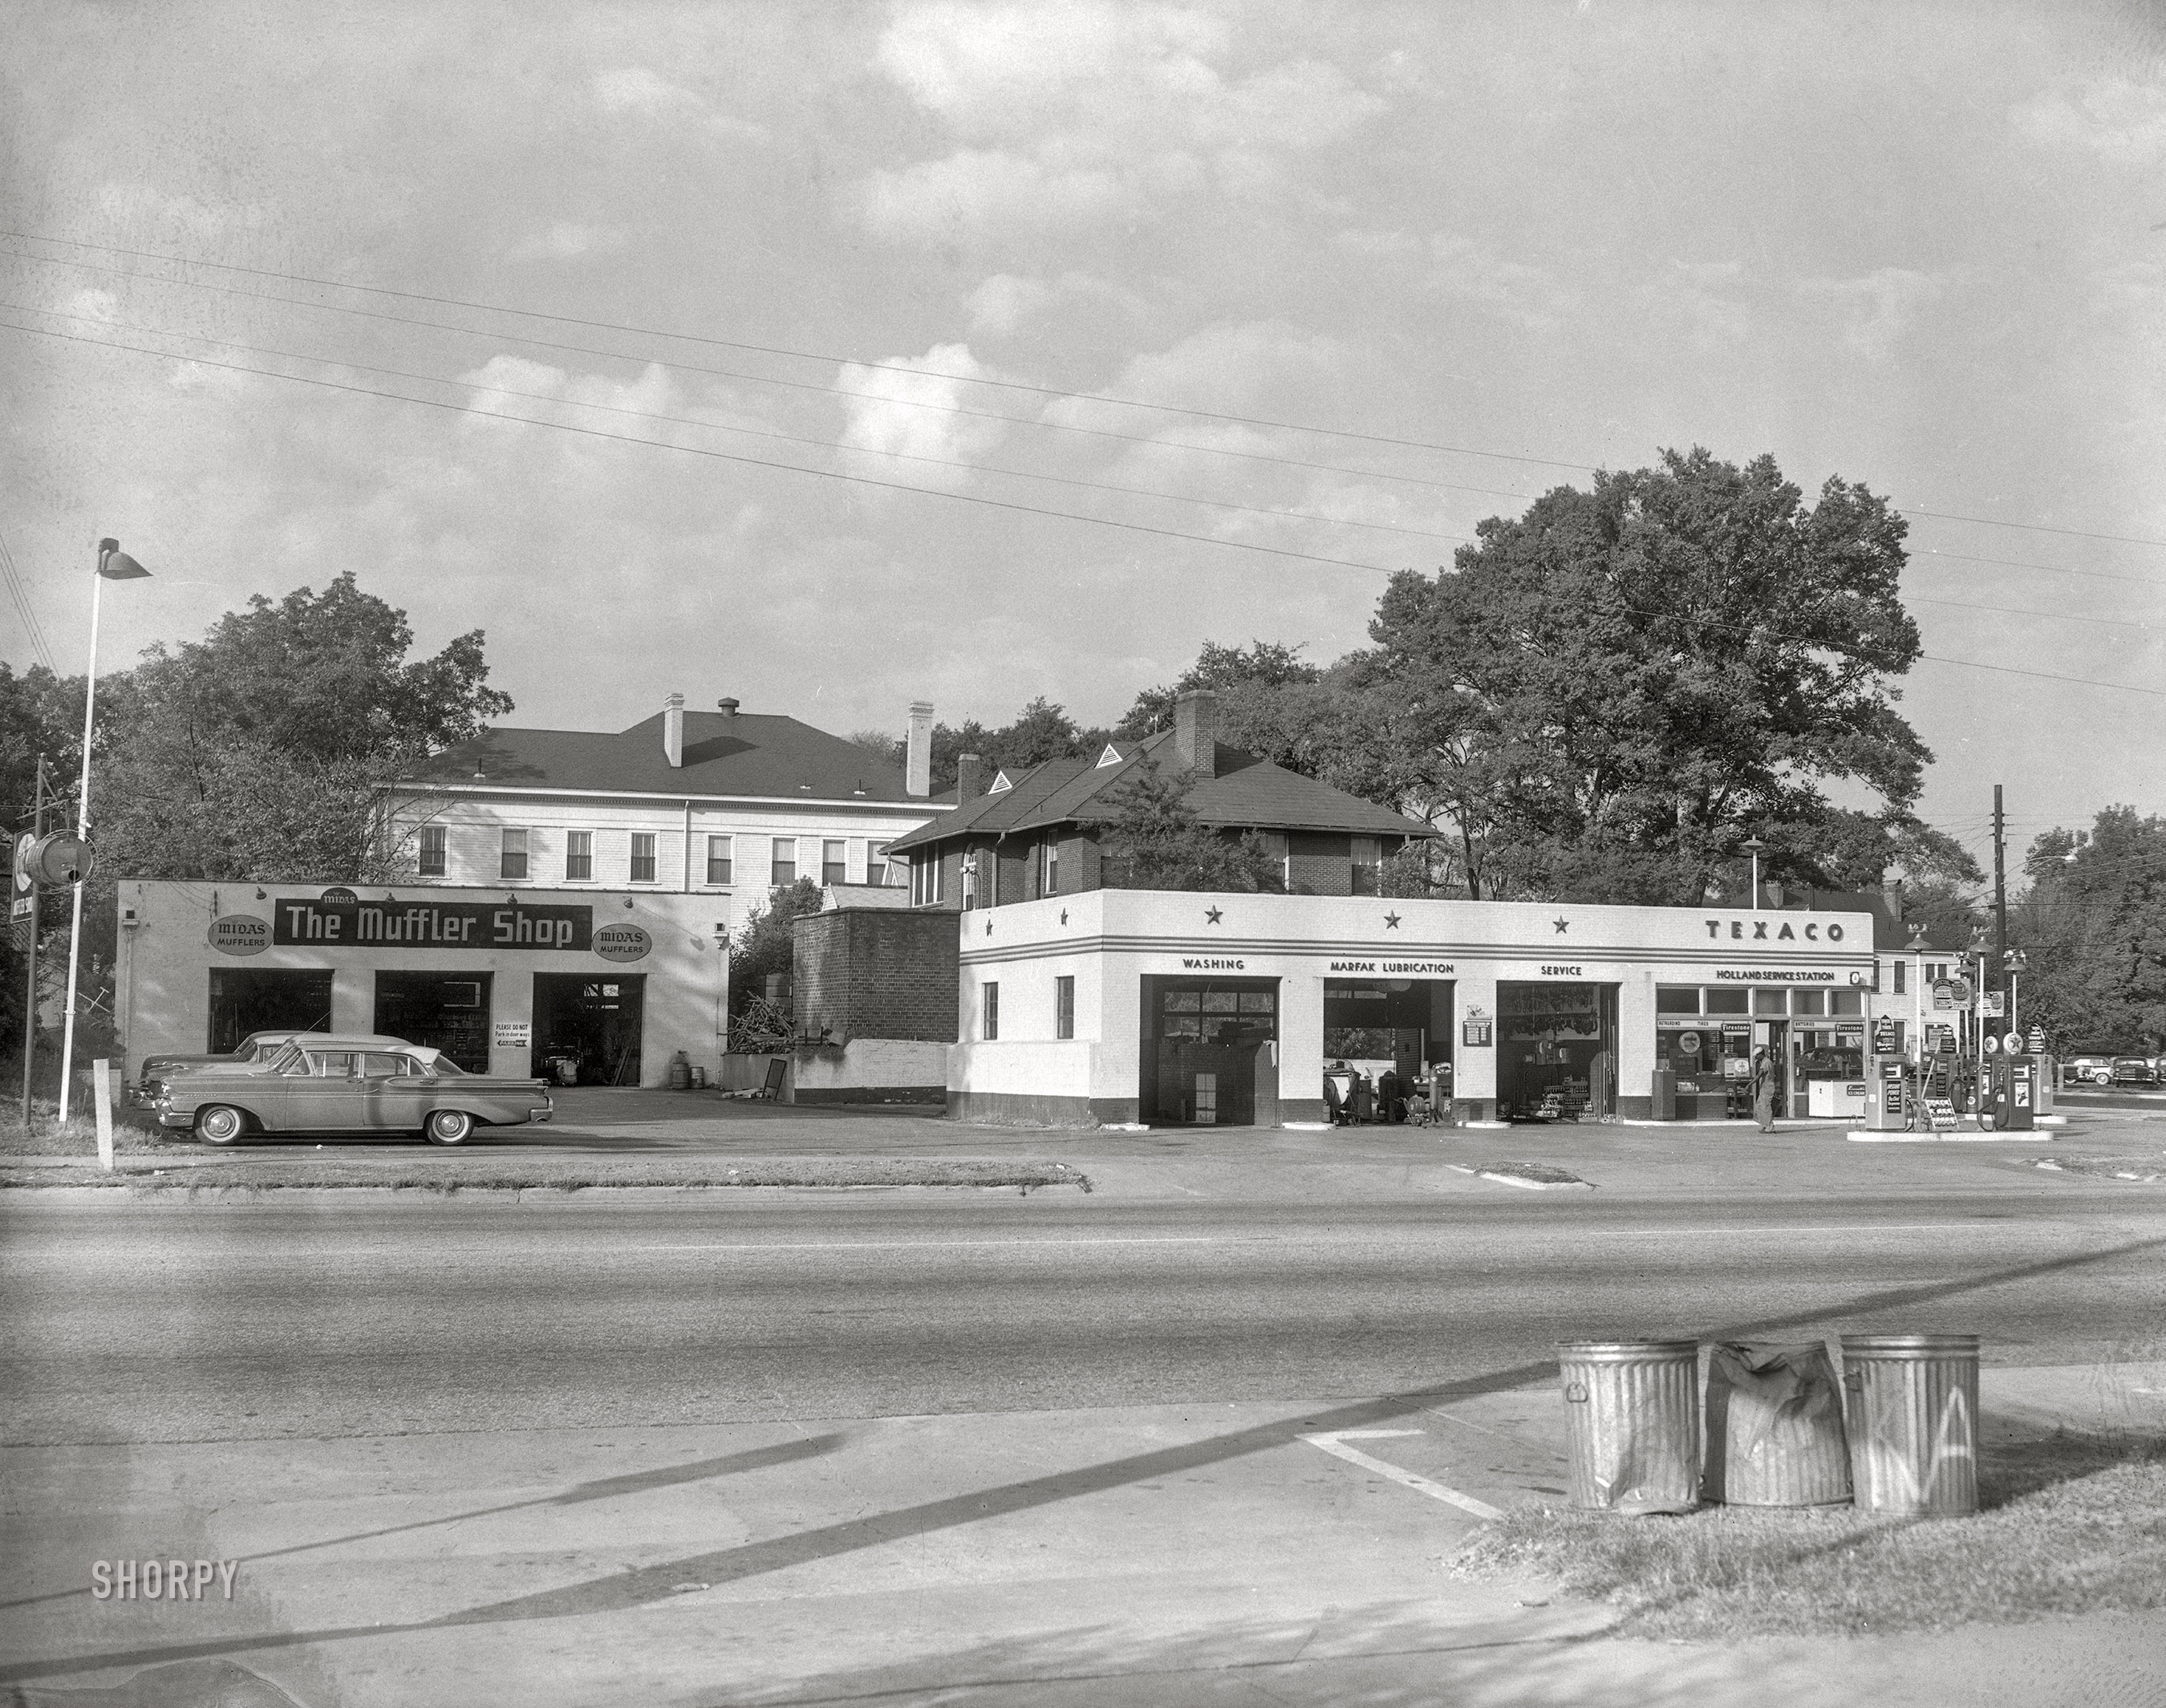 From circa 1960 Columbus, Georgia, comes this News Archive photo of a Midas Muffler Shop next to Holland's Texaco service. Fill 'er up with Su-Preme! 4x5 acetate negative. View full size.